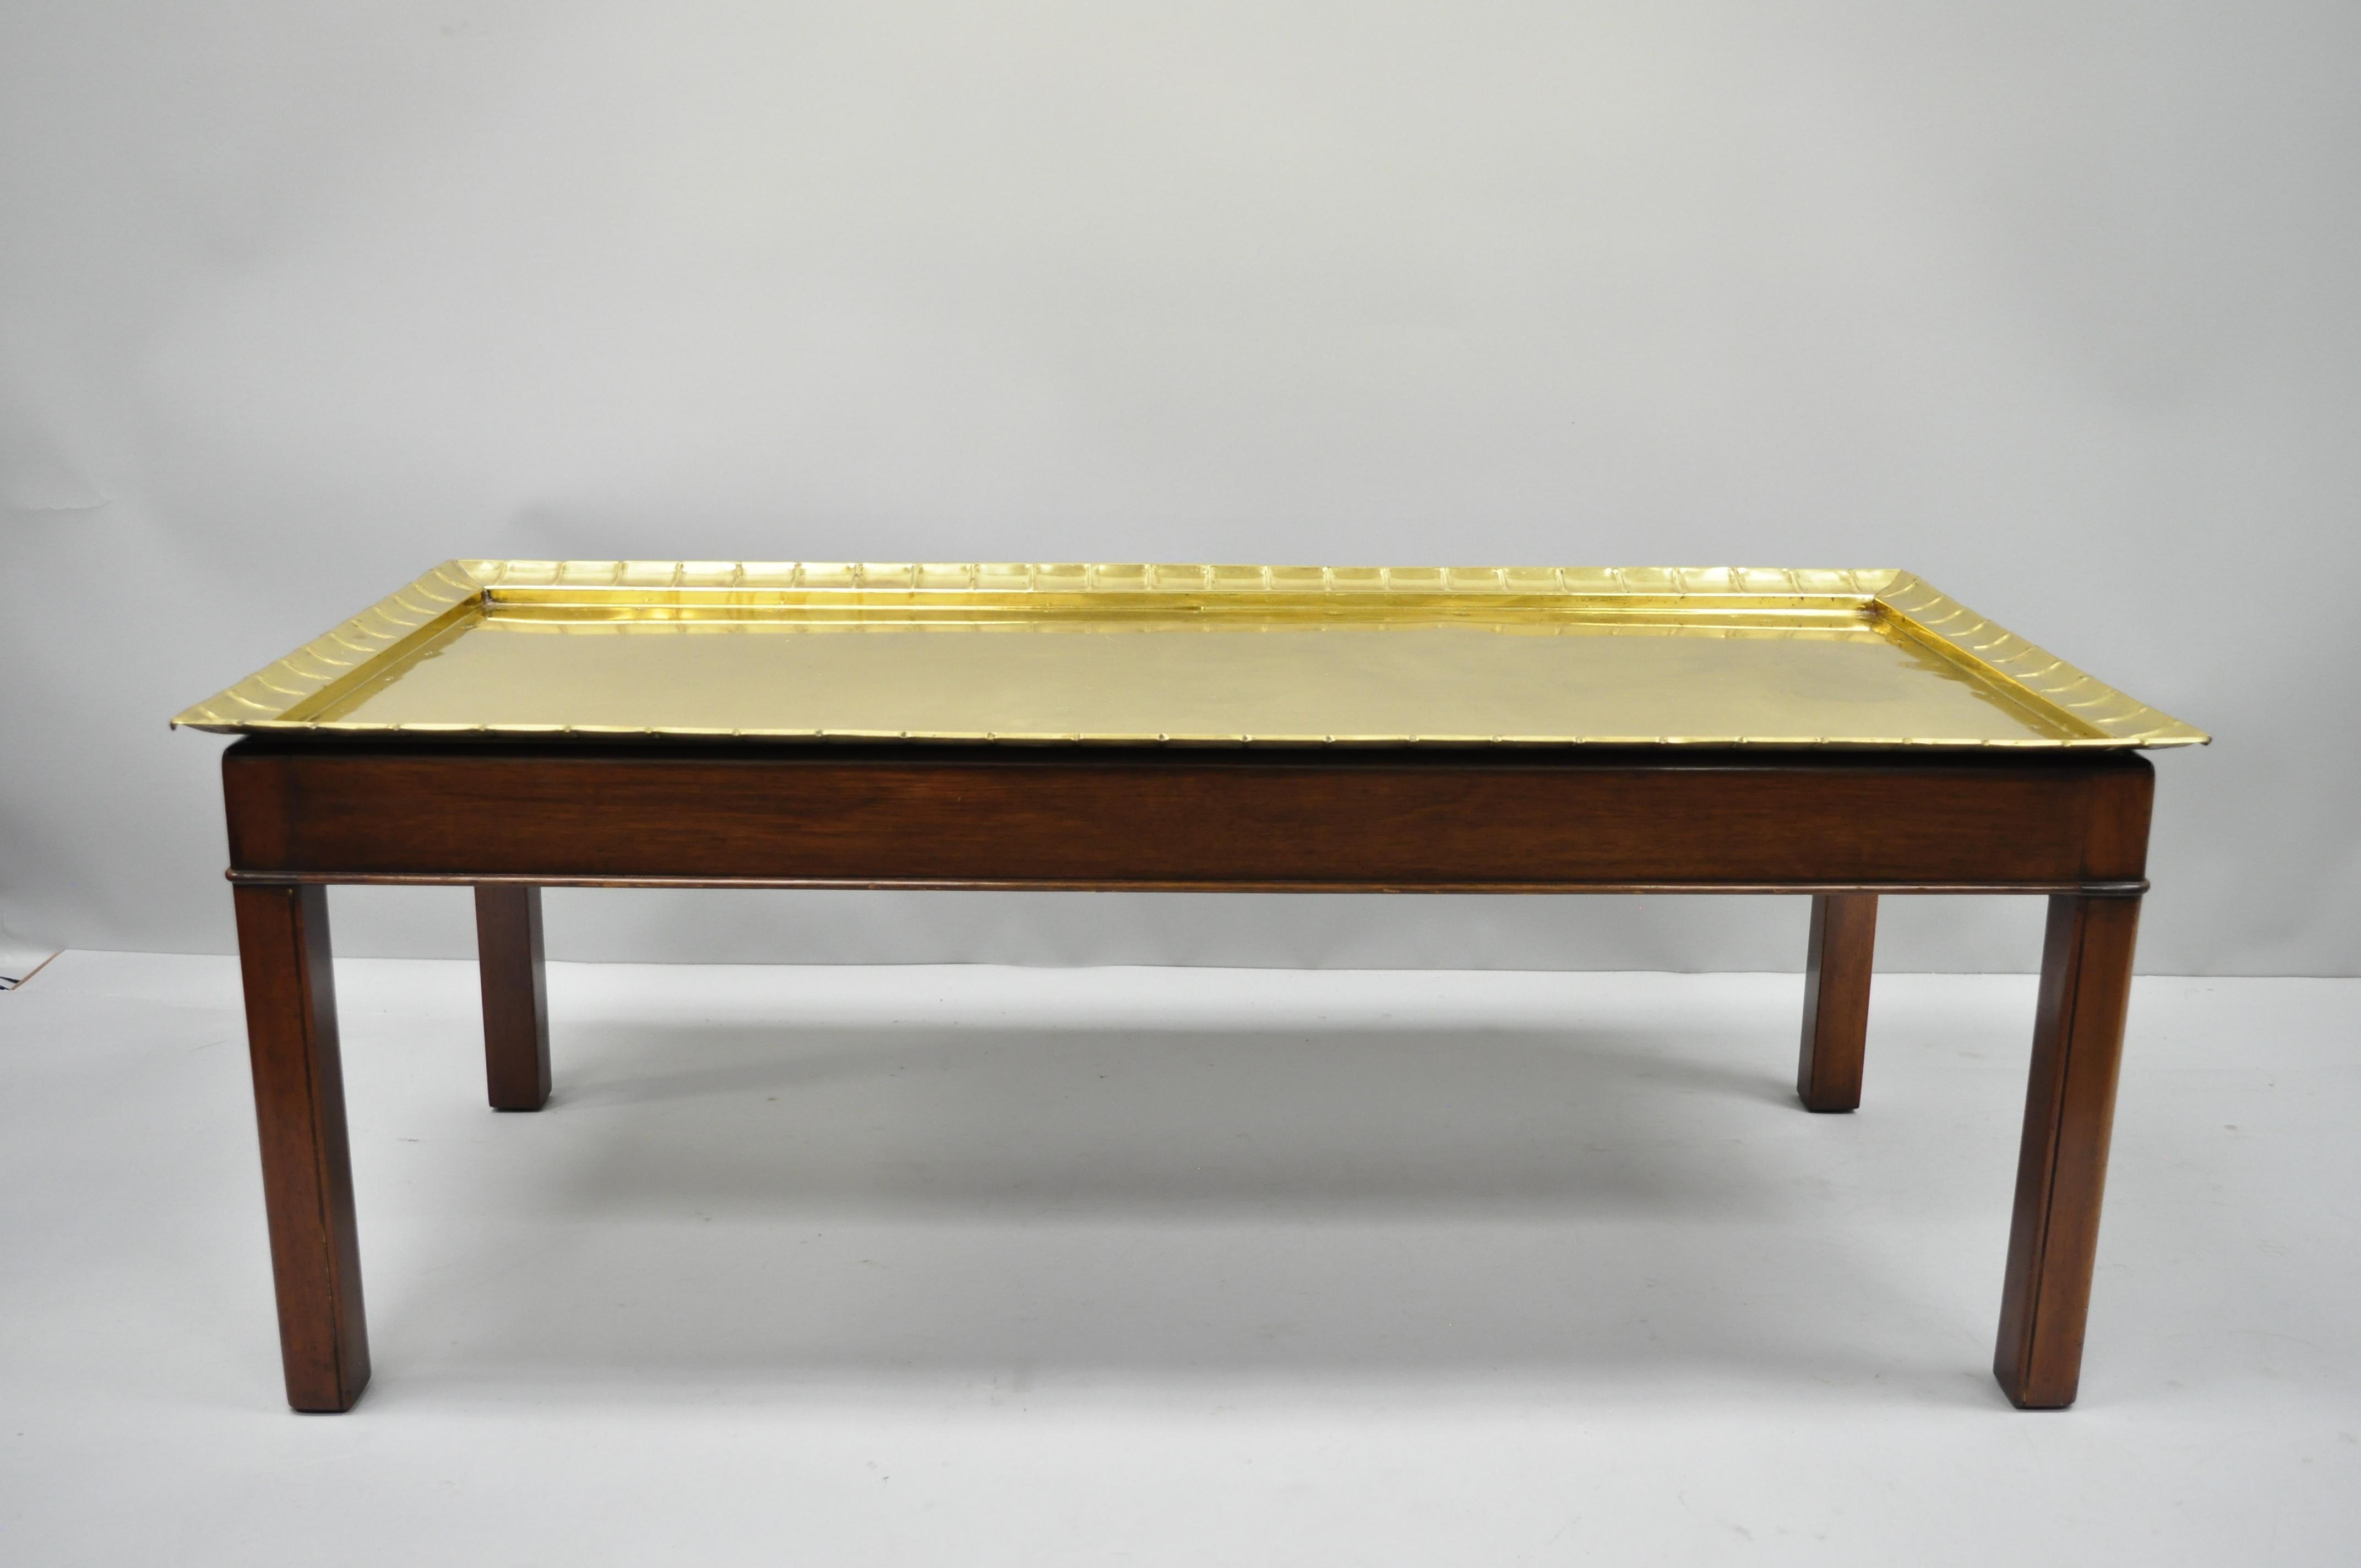 English Campaign Style Mahogany and Brass Tray Top Georgian Style Coffee Table For Sale 6